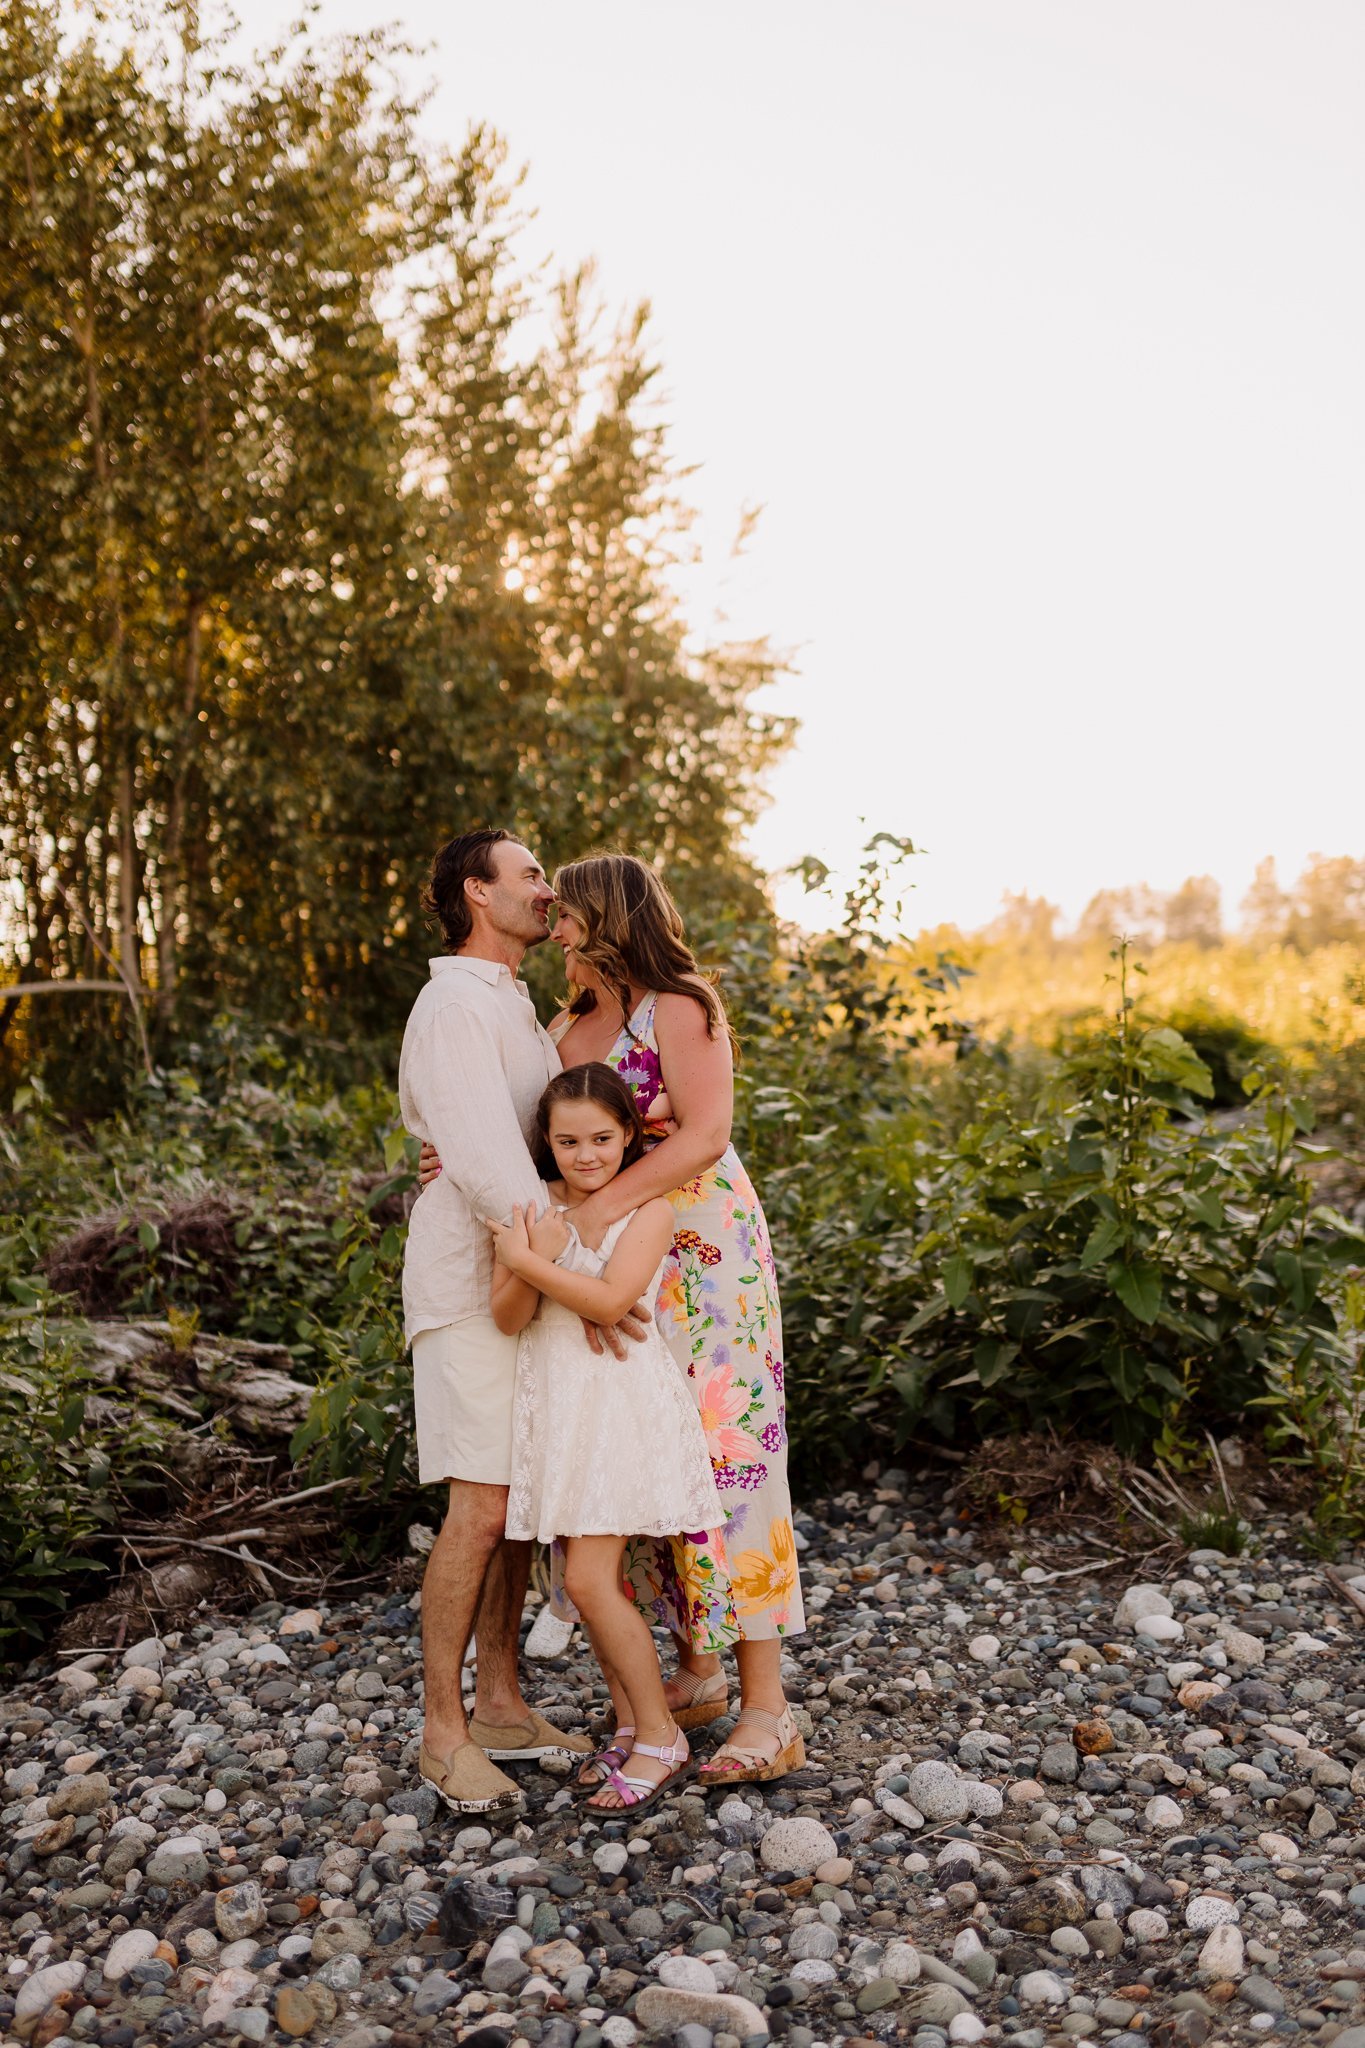 Vedder+River+Family+Session+-+Anna+Hurley+Photography++(1).jpg